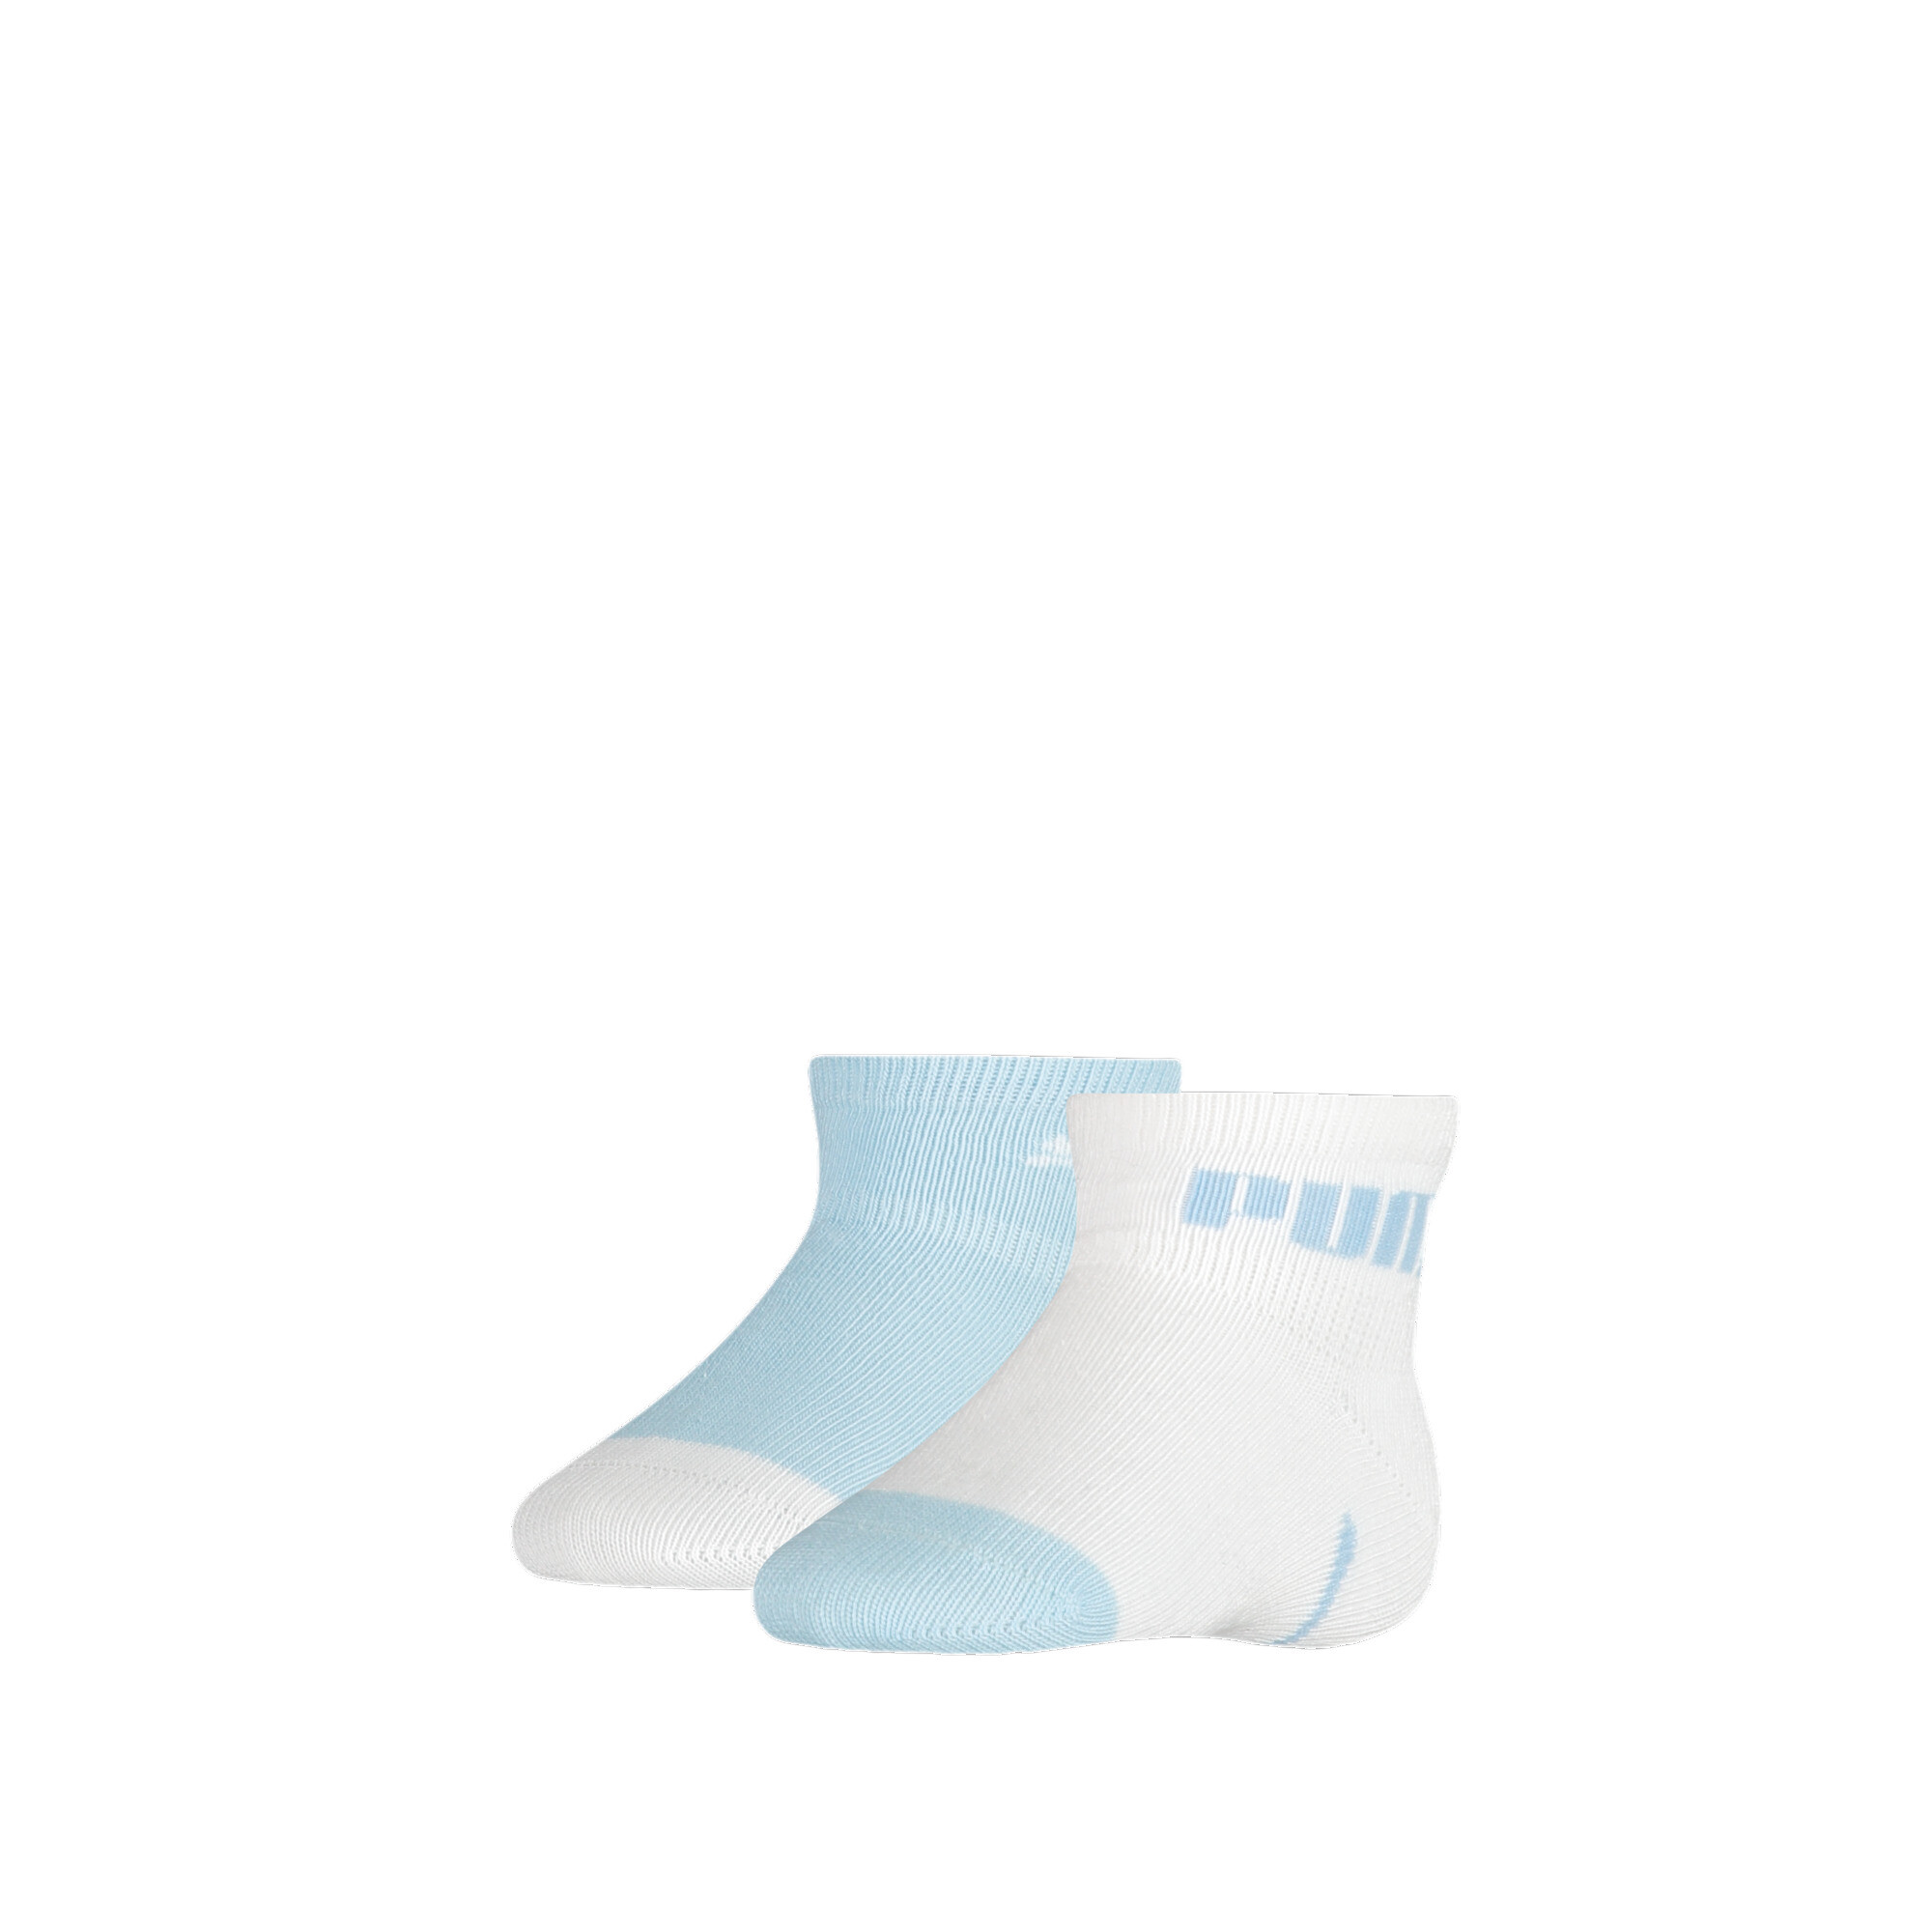 Kids' PUMA Baby Mini Cats Lifestyle Socks 2 Pack In Blue, Size 27-30